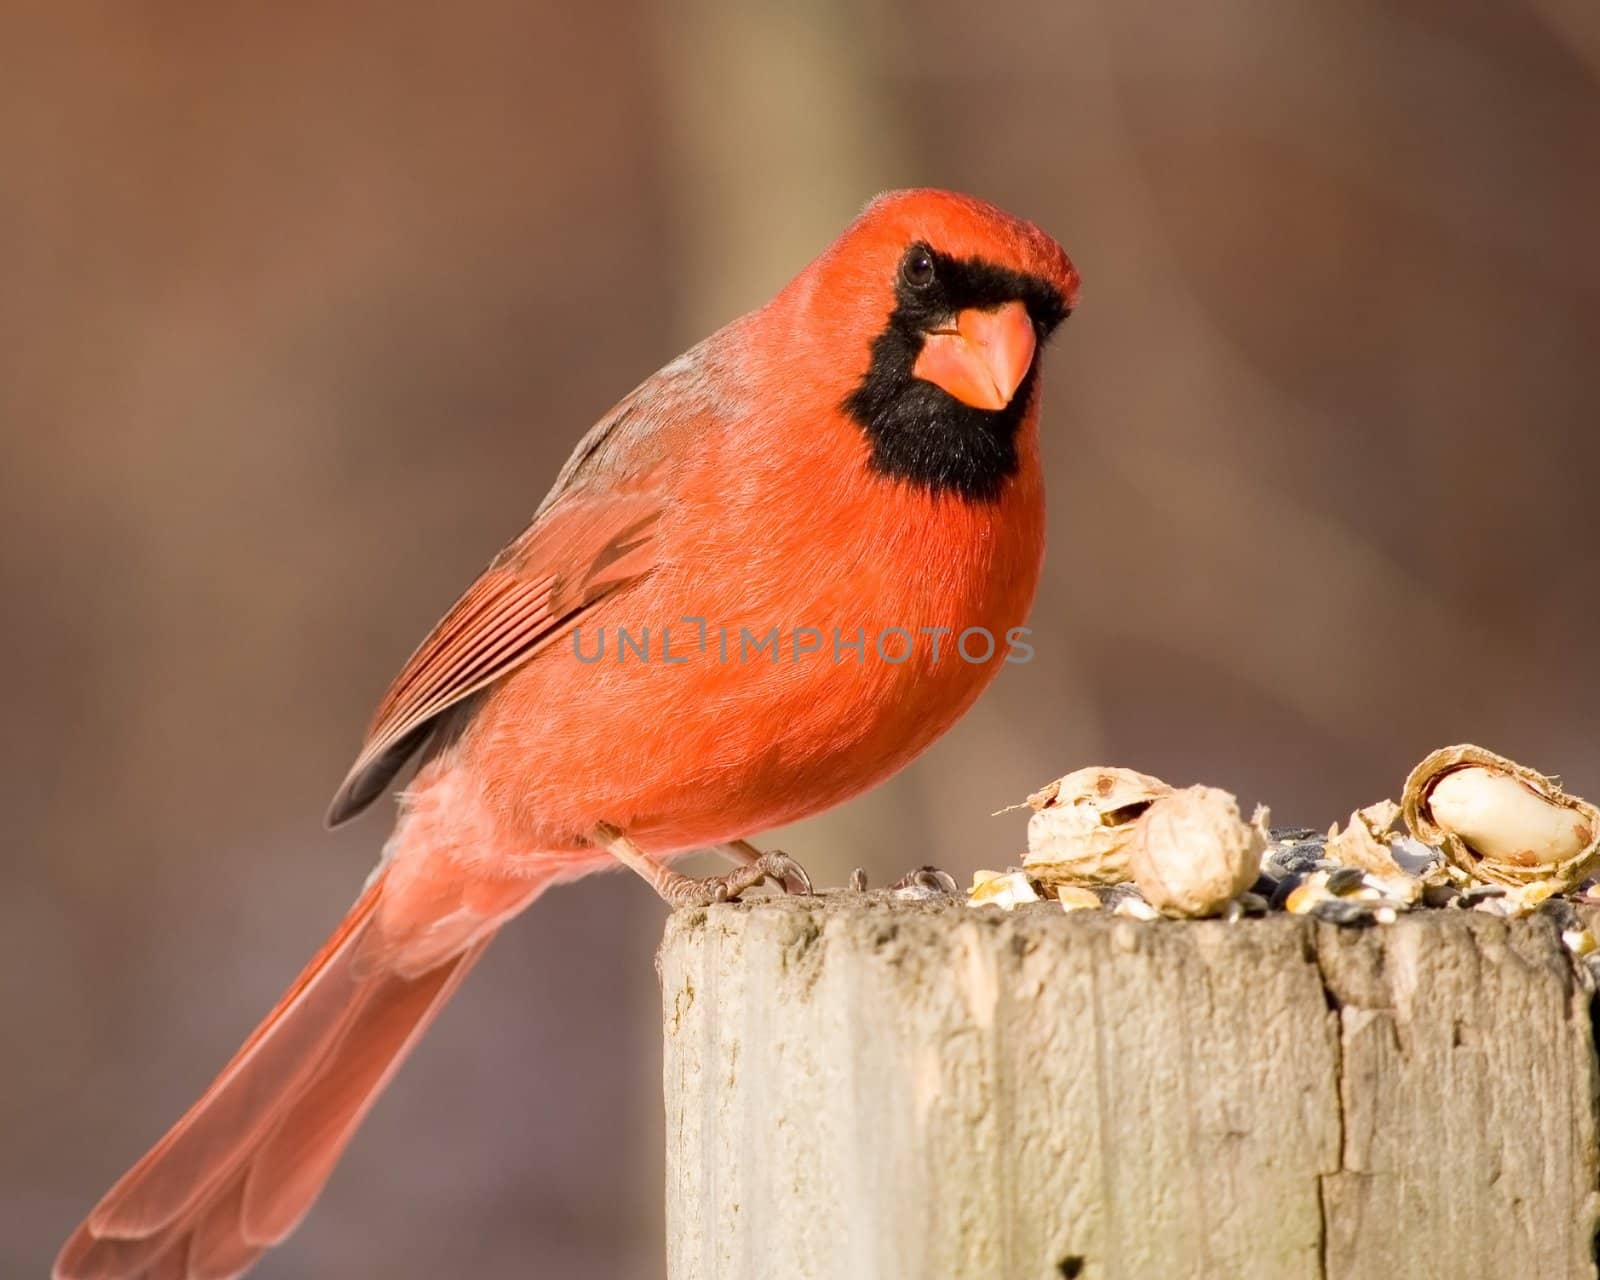 A male cardinal perched on a wooden post with bird seed.